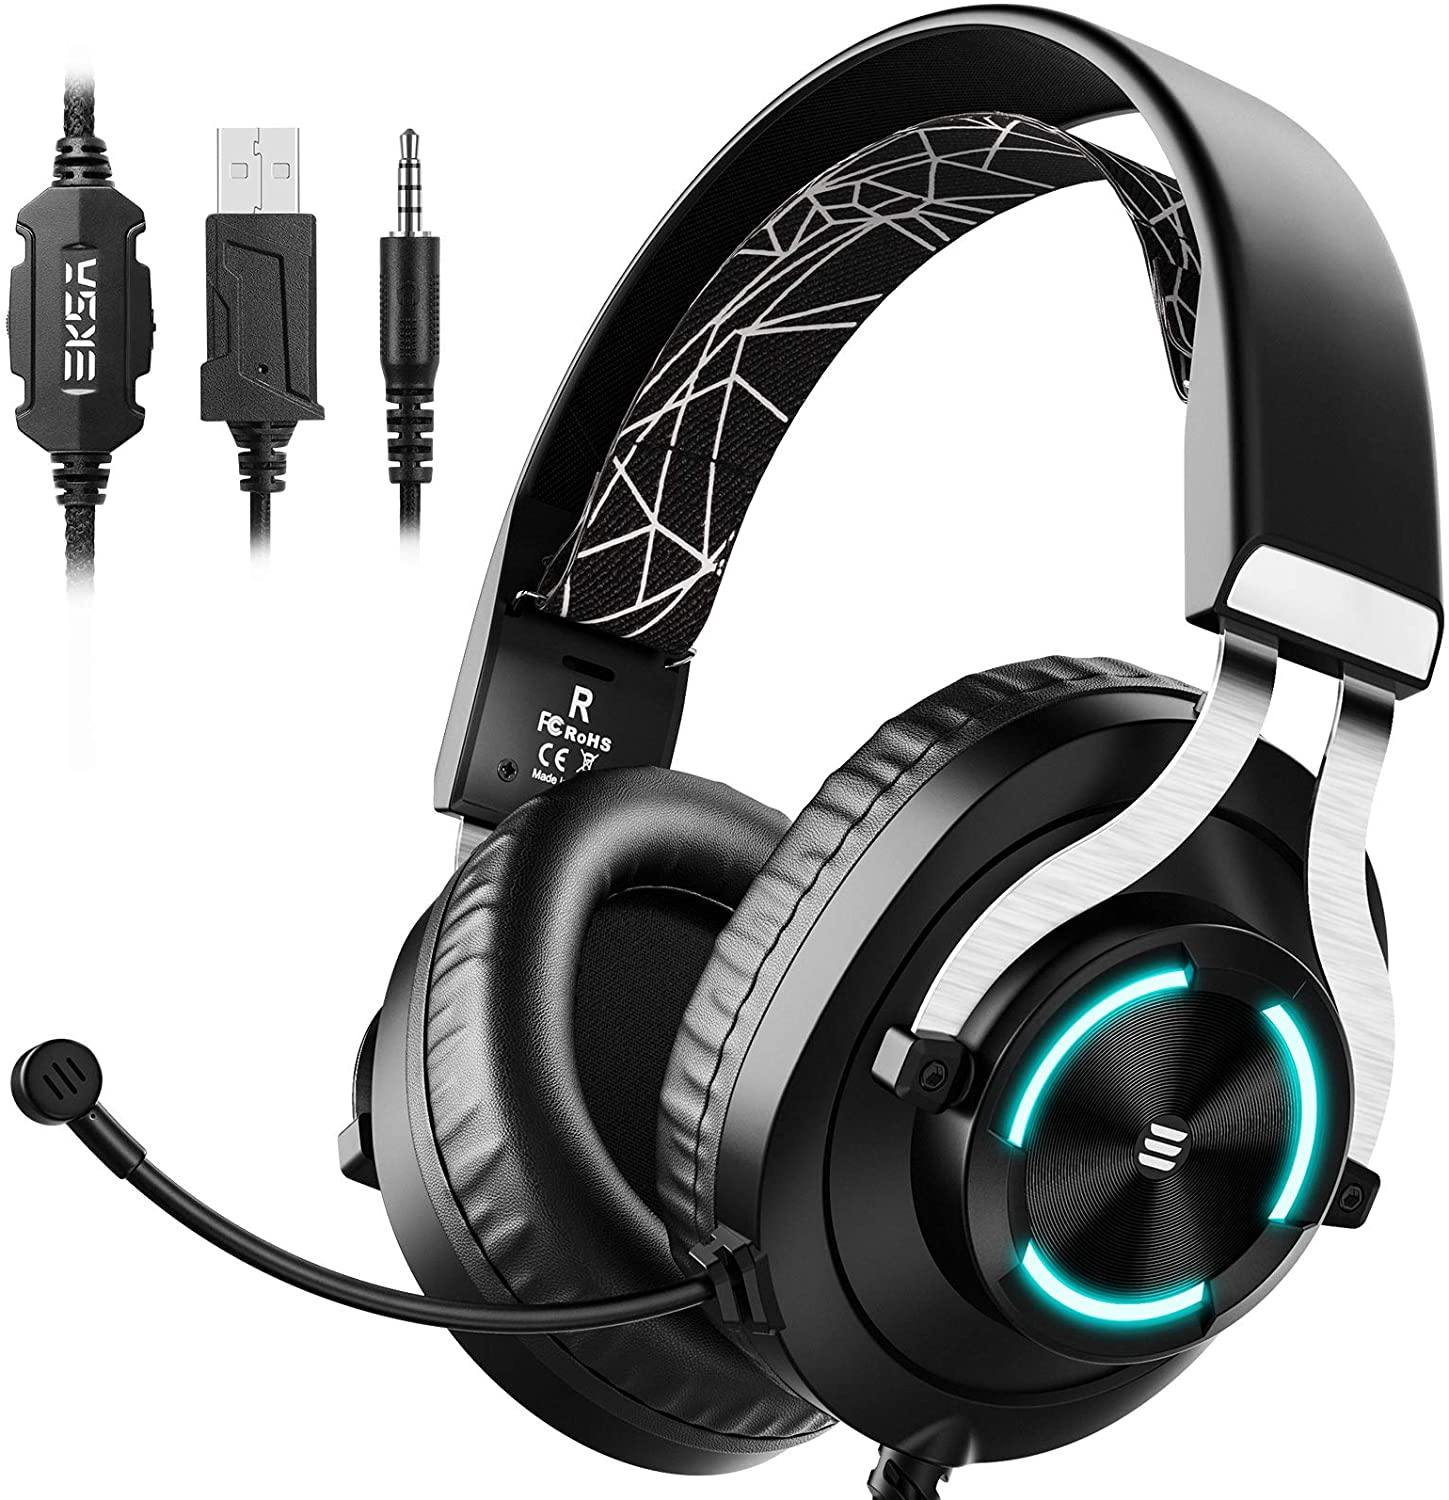 EKSA E3000 Wired Gaming Headset with RGB light